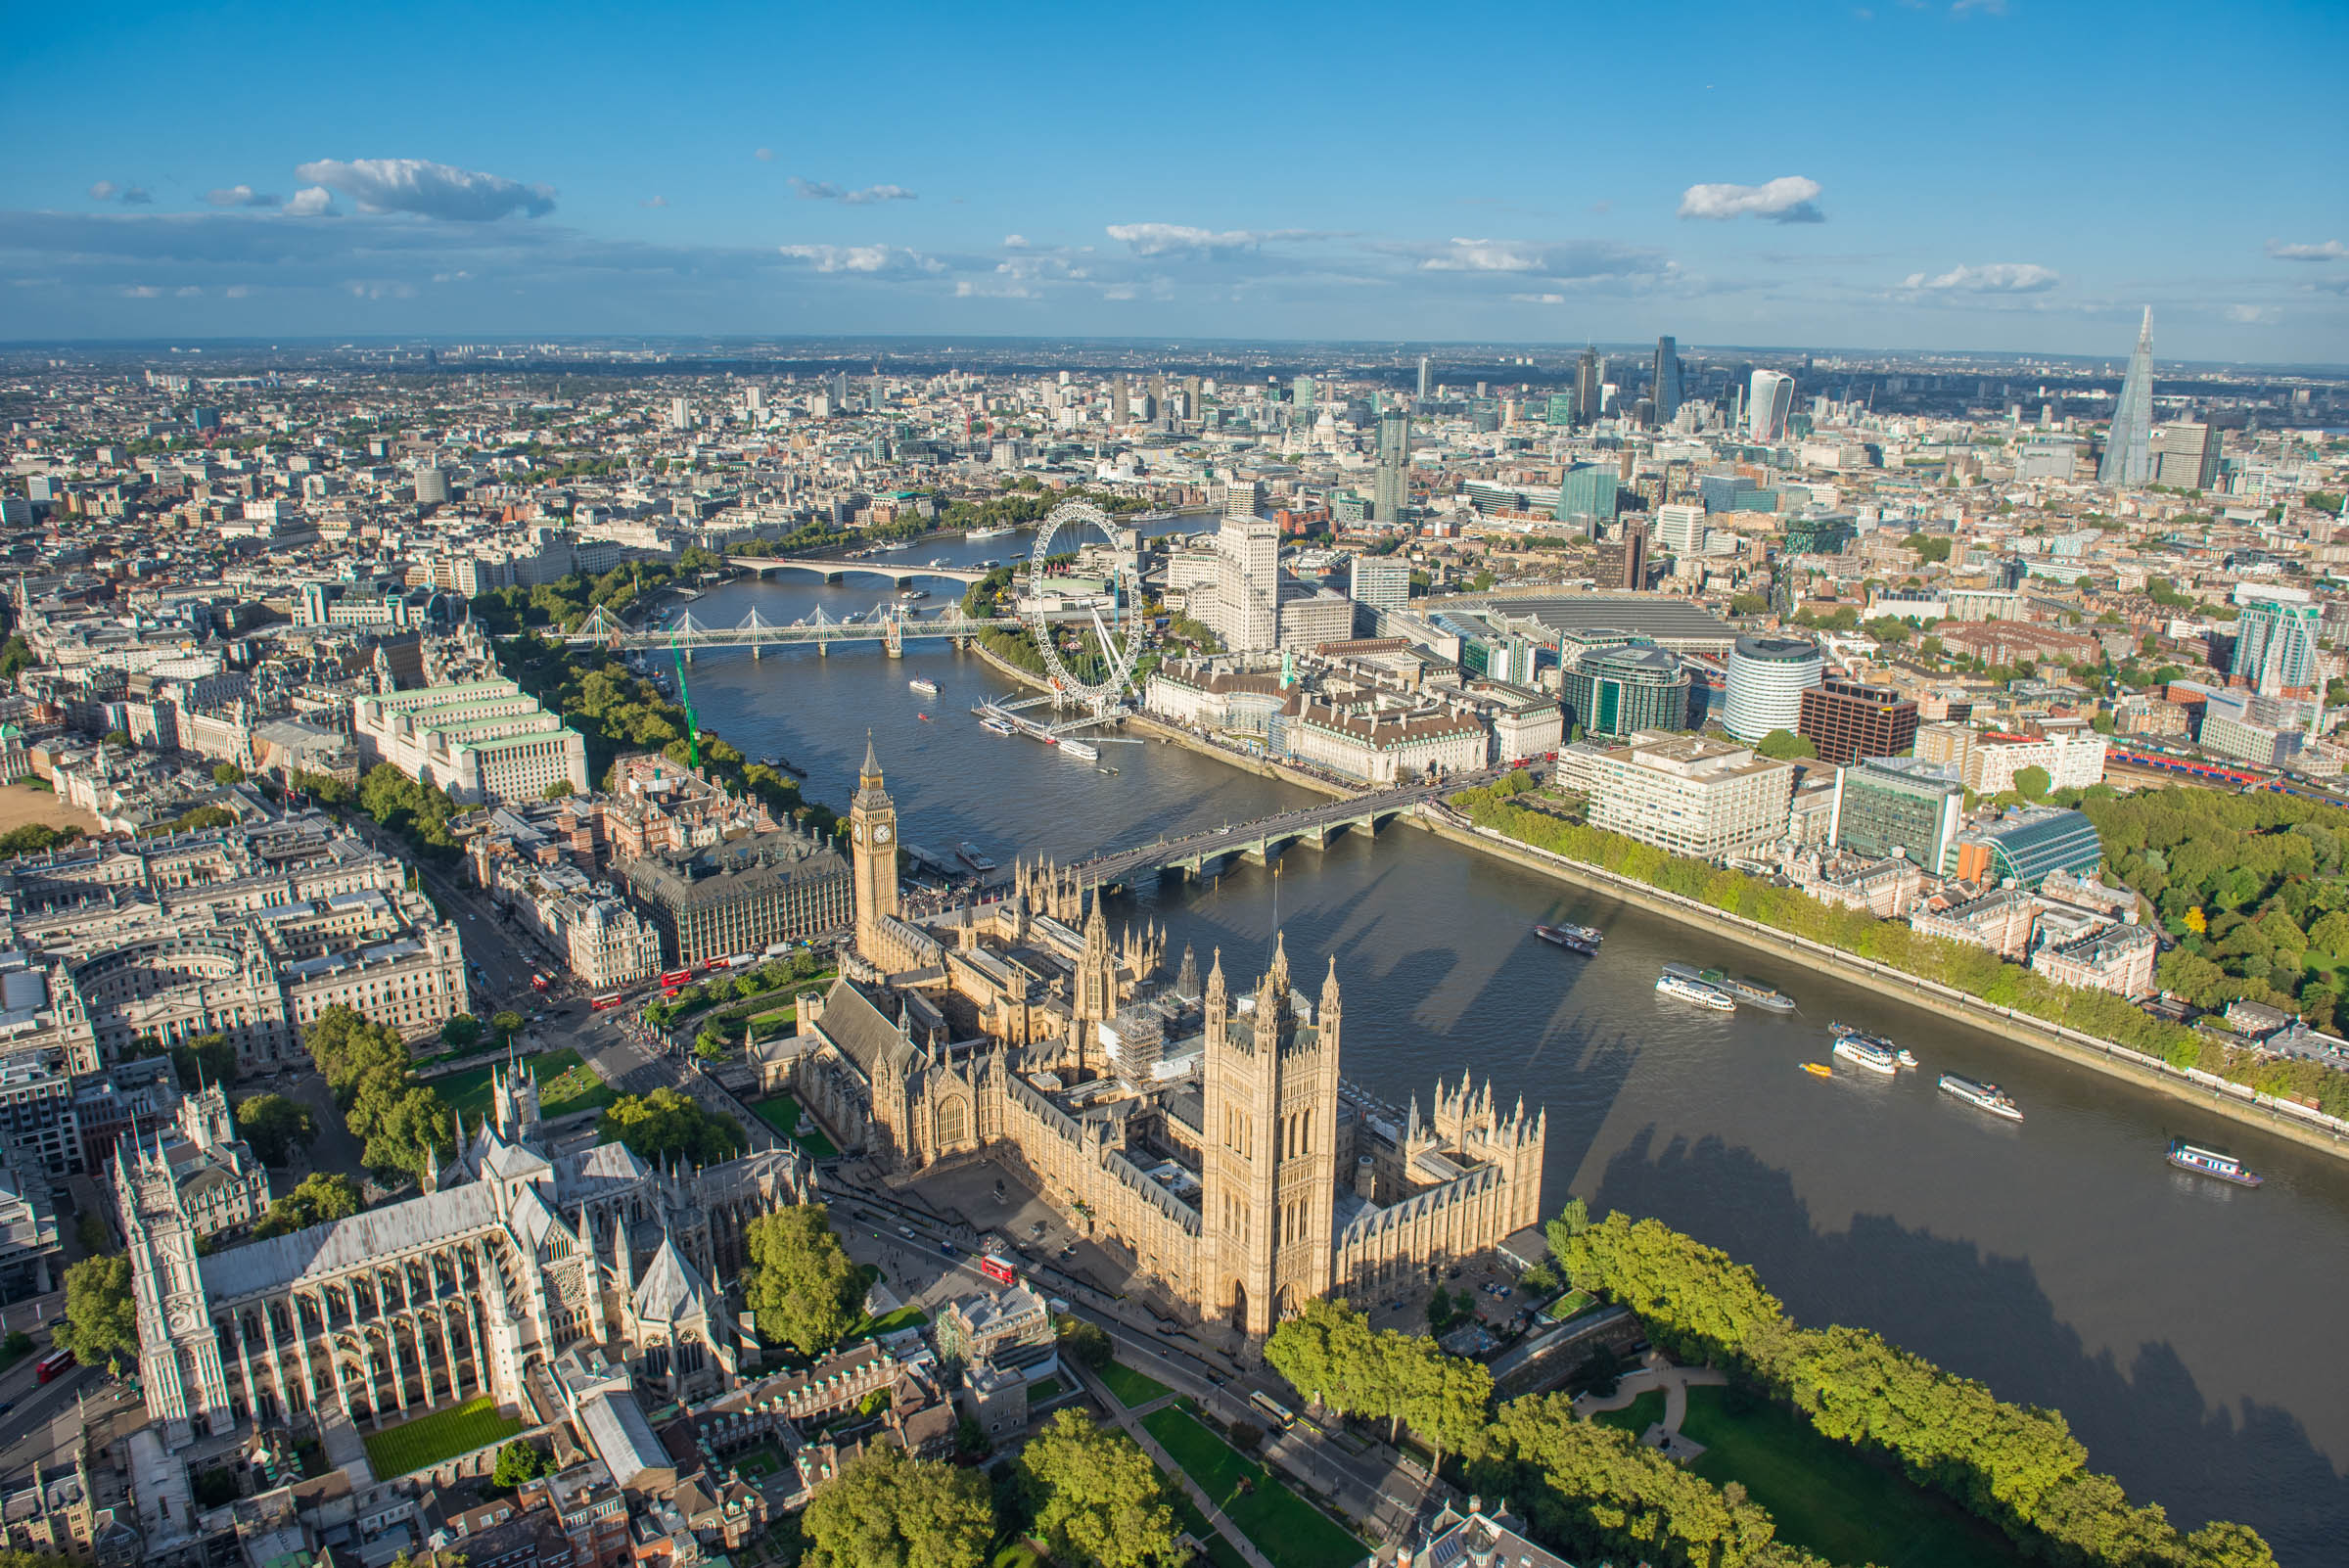 Palace of Westminster, Whitehall and River Thames.